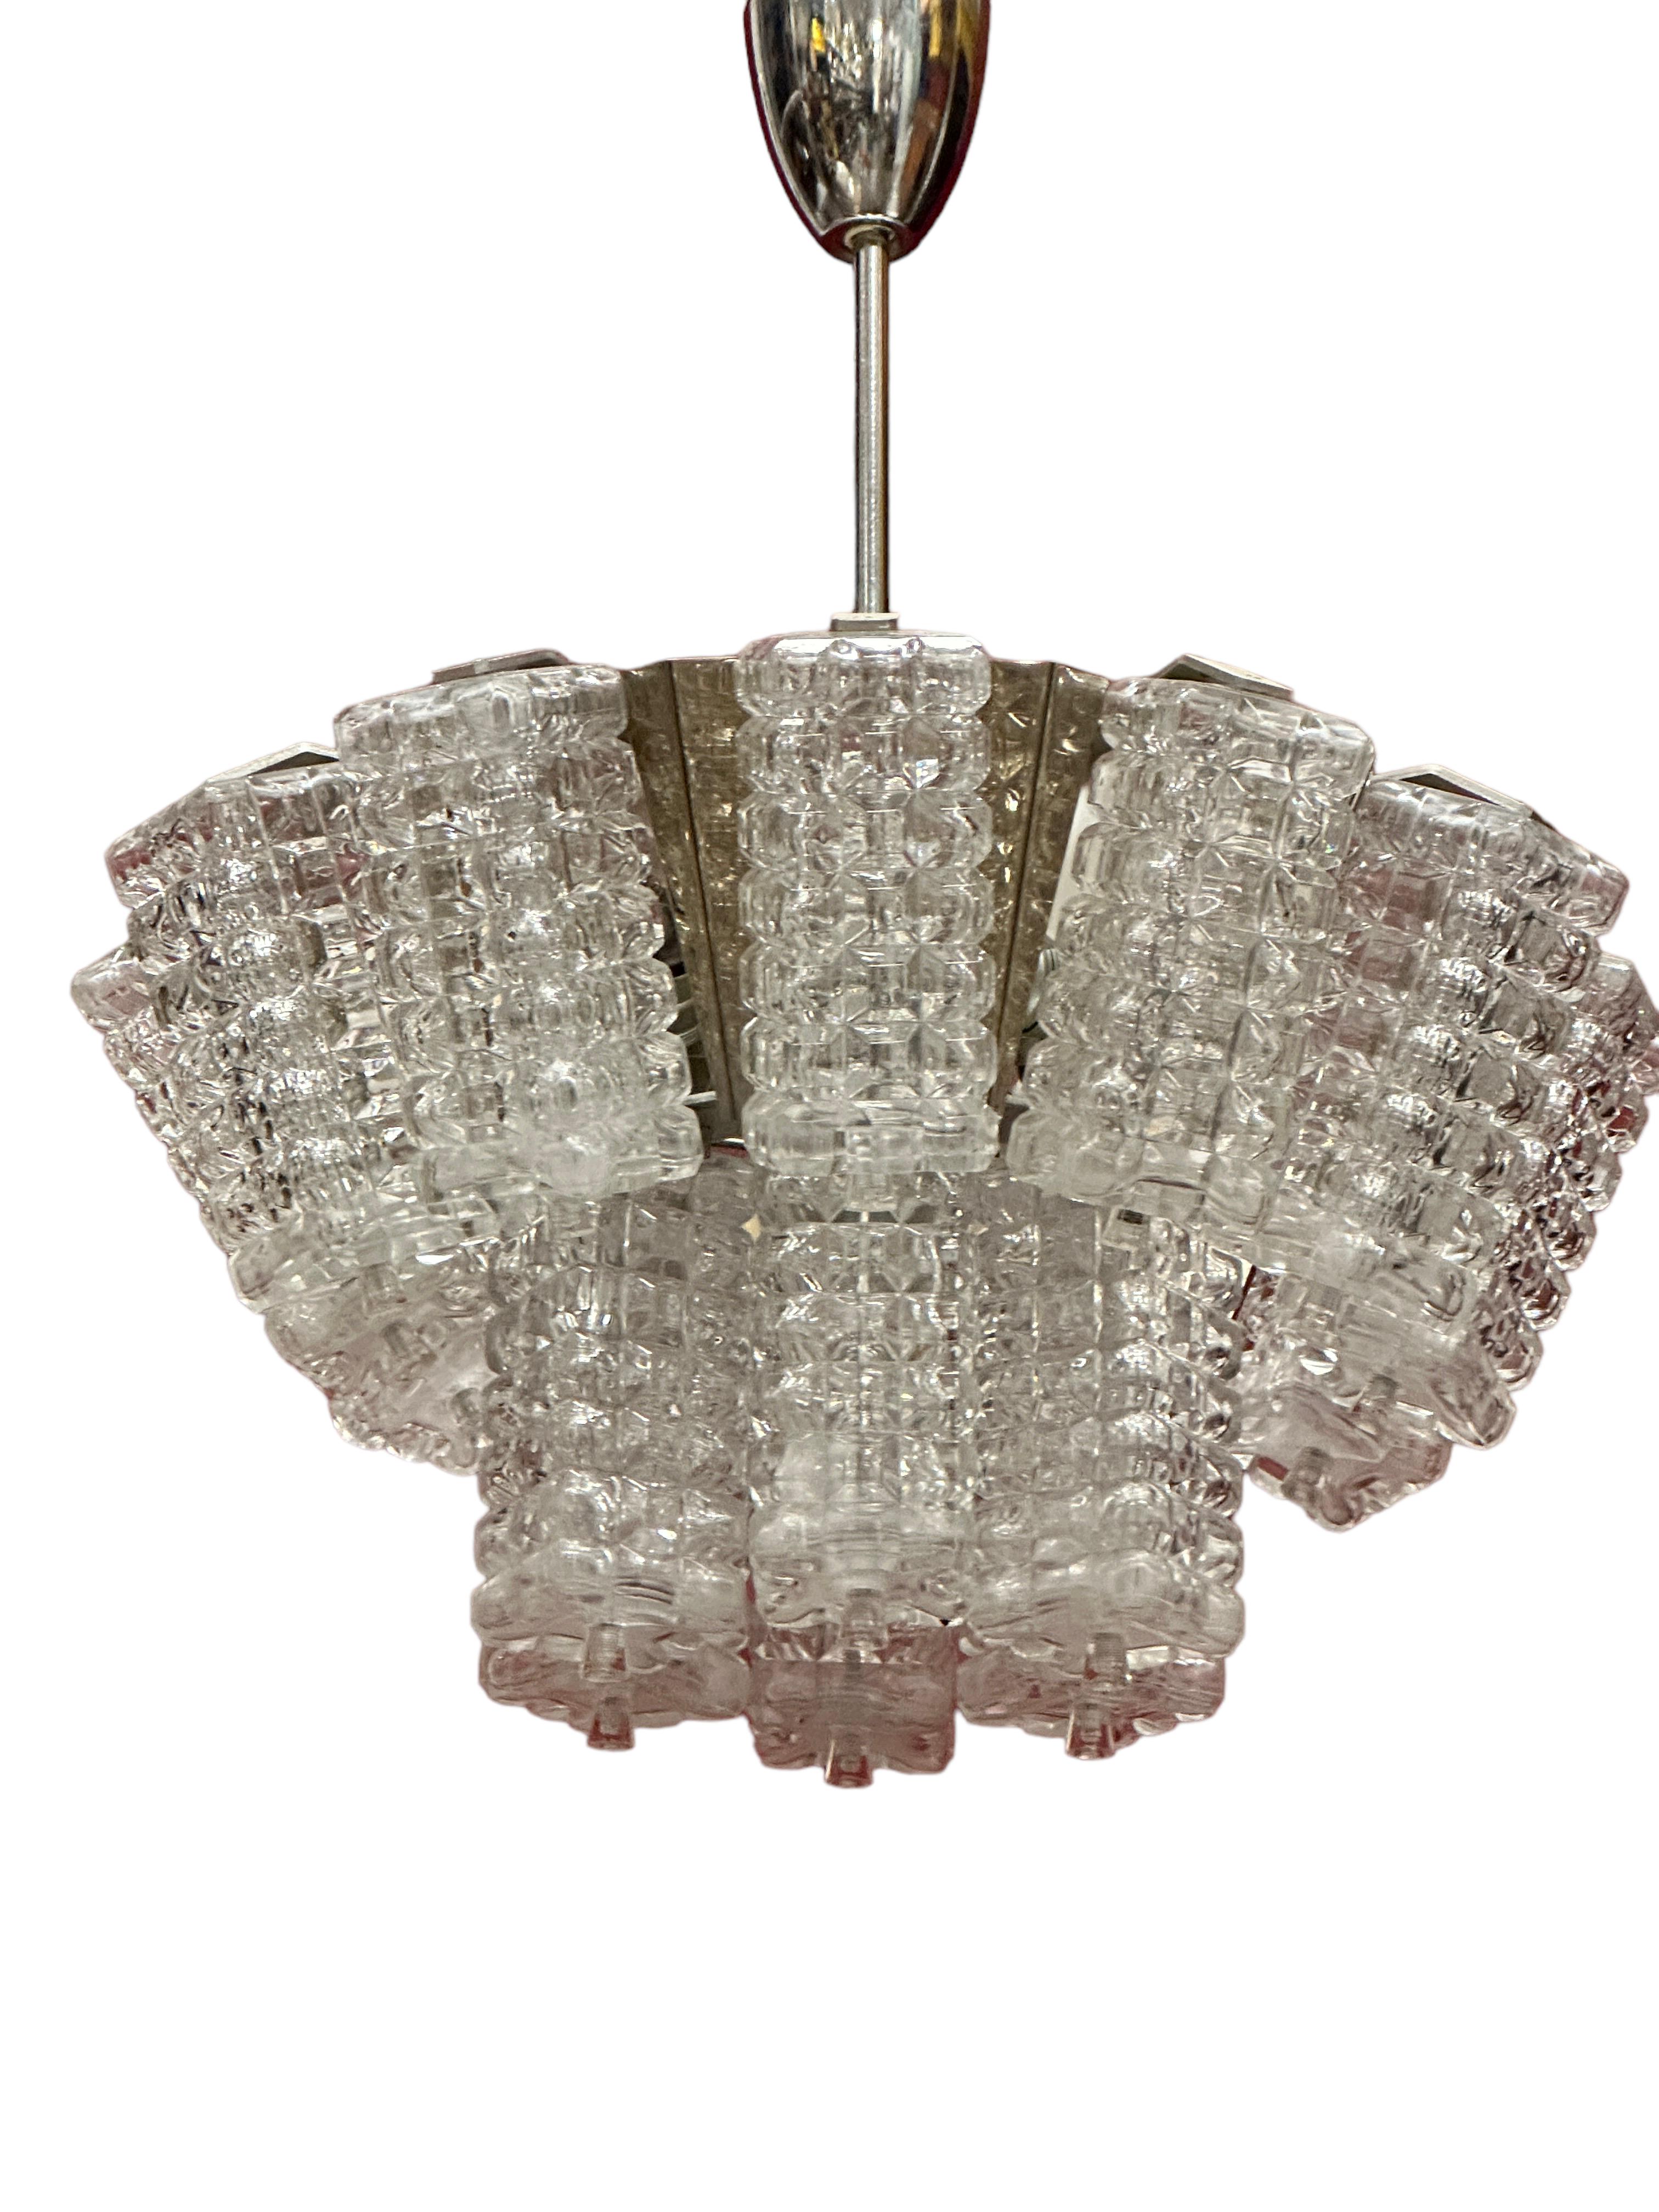 Pair of Two Tiered Glass Cube Chandelier by Austrolux, Austria, 1960s For Sale 1